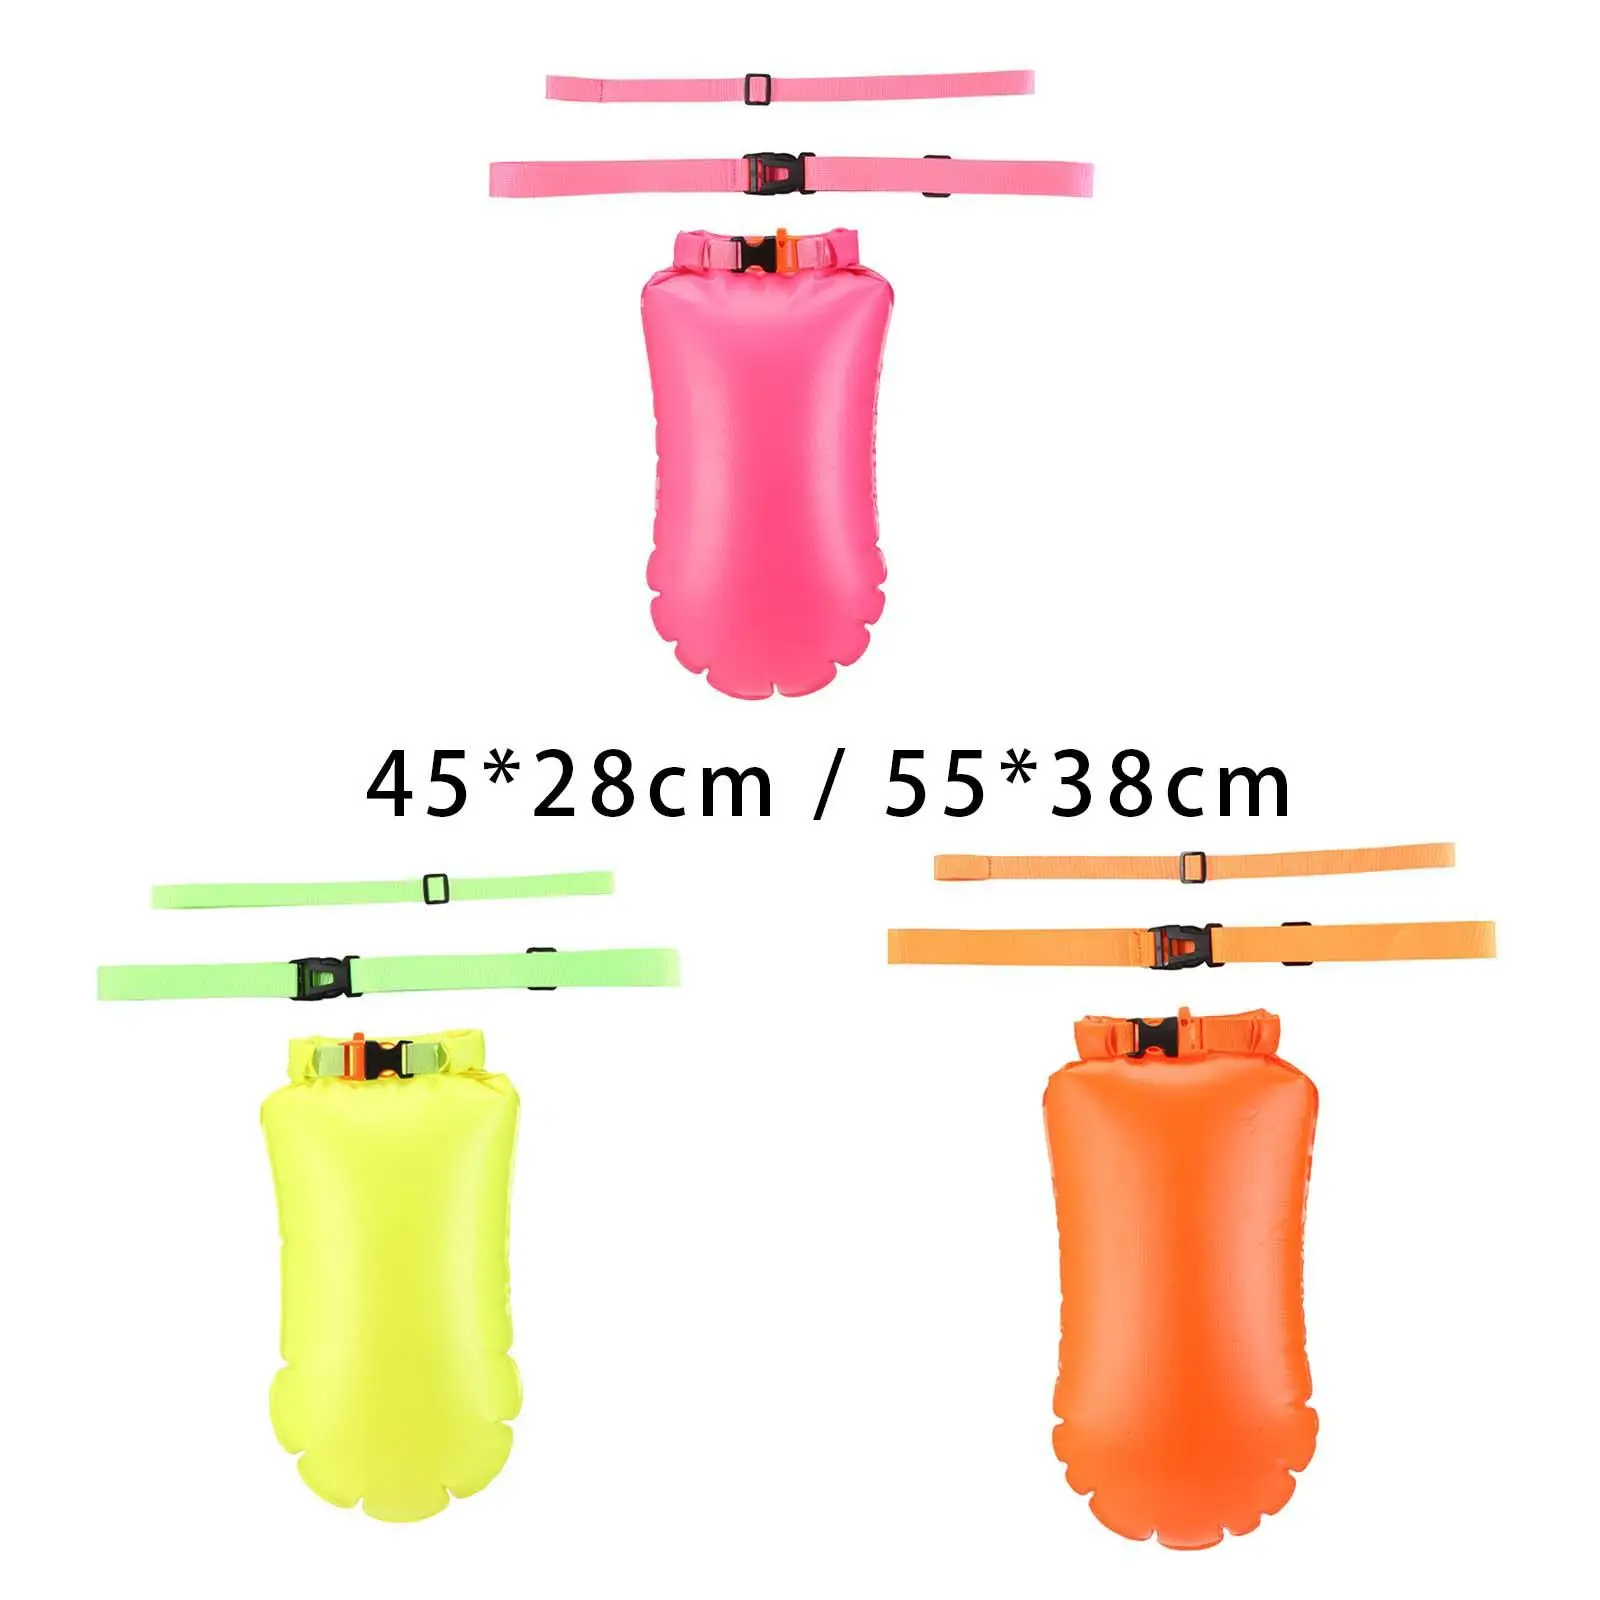 

Safety Swim Buoy Waterproof Bag Swimming Buoy Tow Float for Outdoor Boating